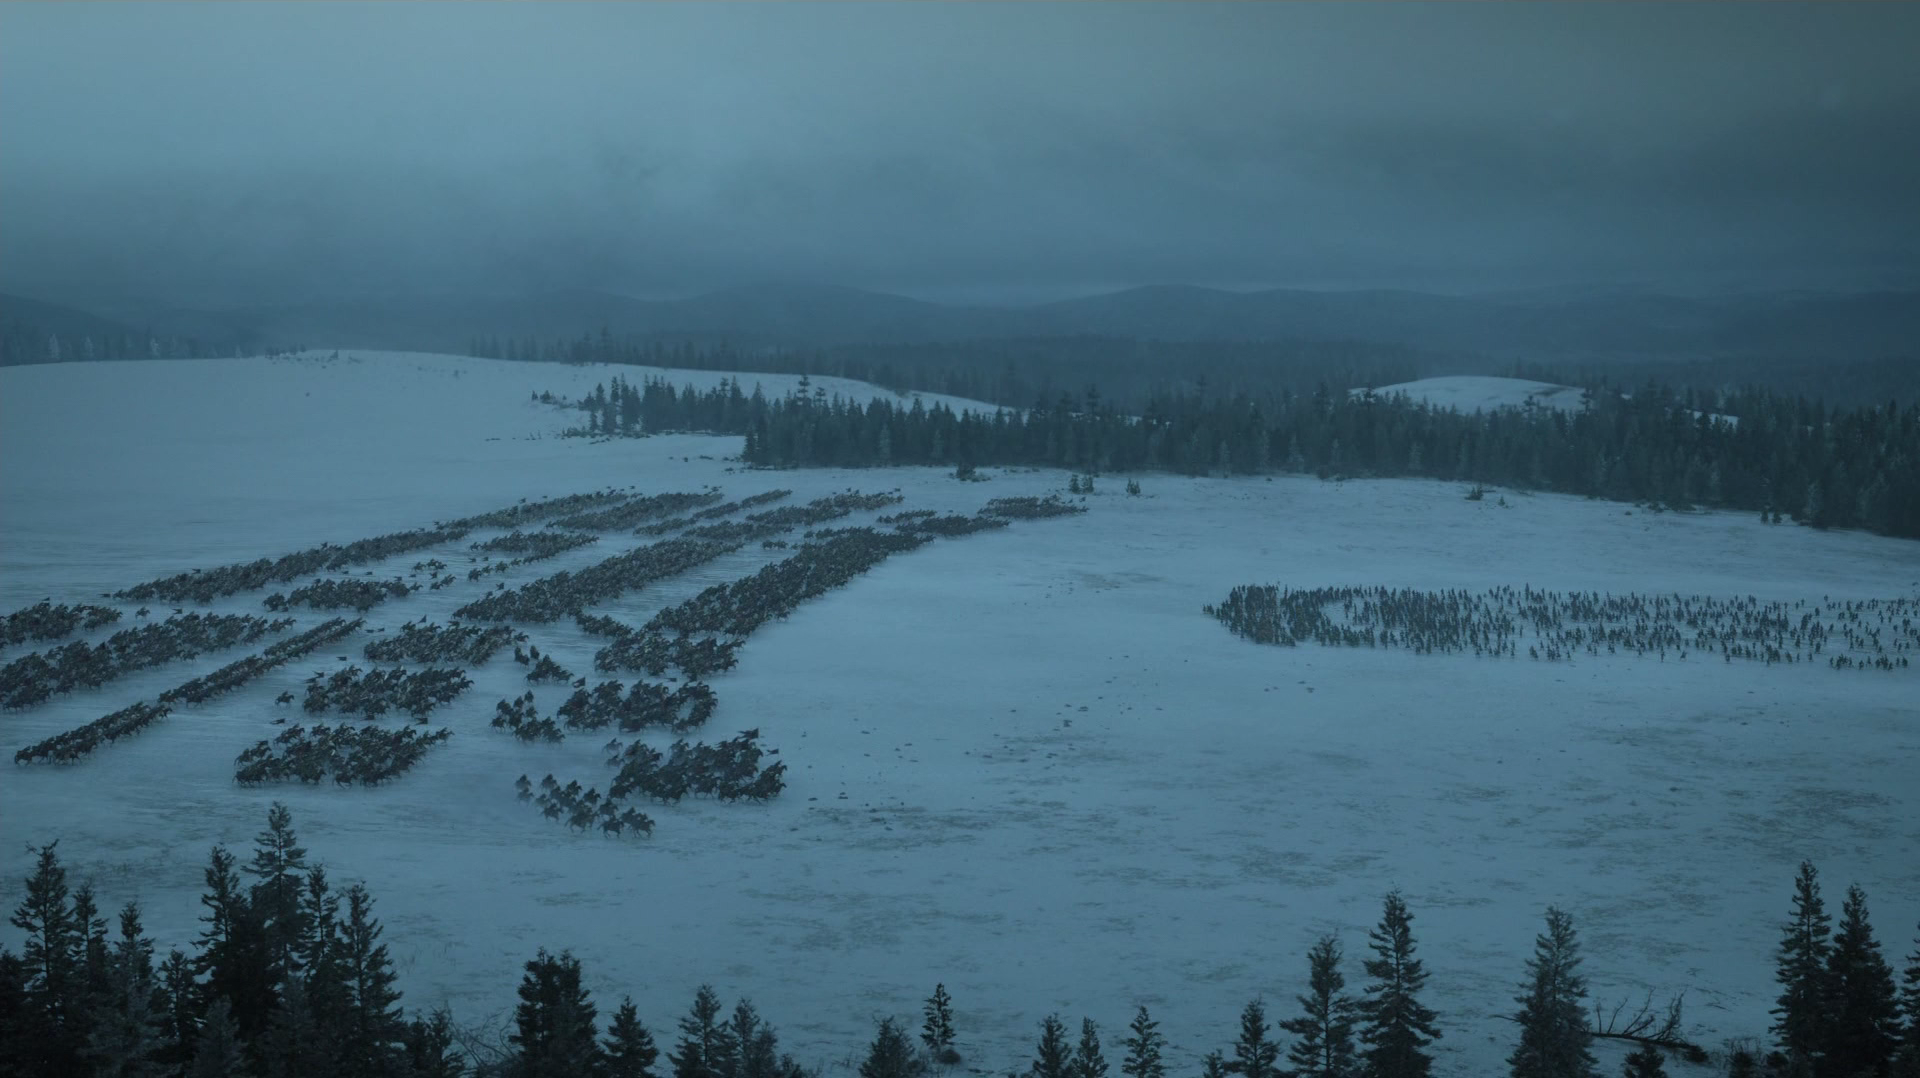 Battle Of Winterfell War Of The Five Kings Game Of Thrones